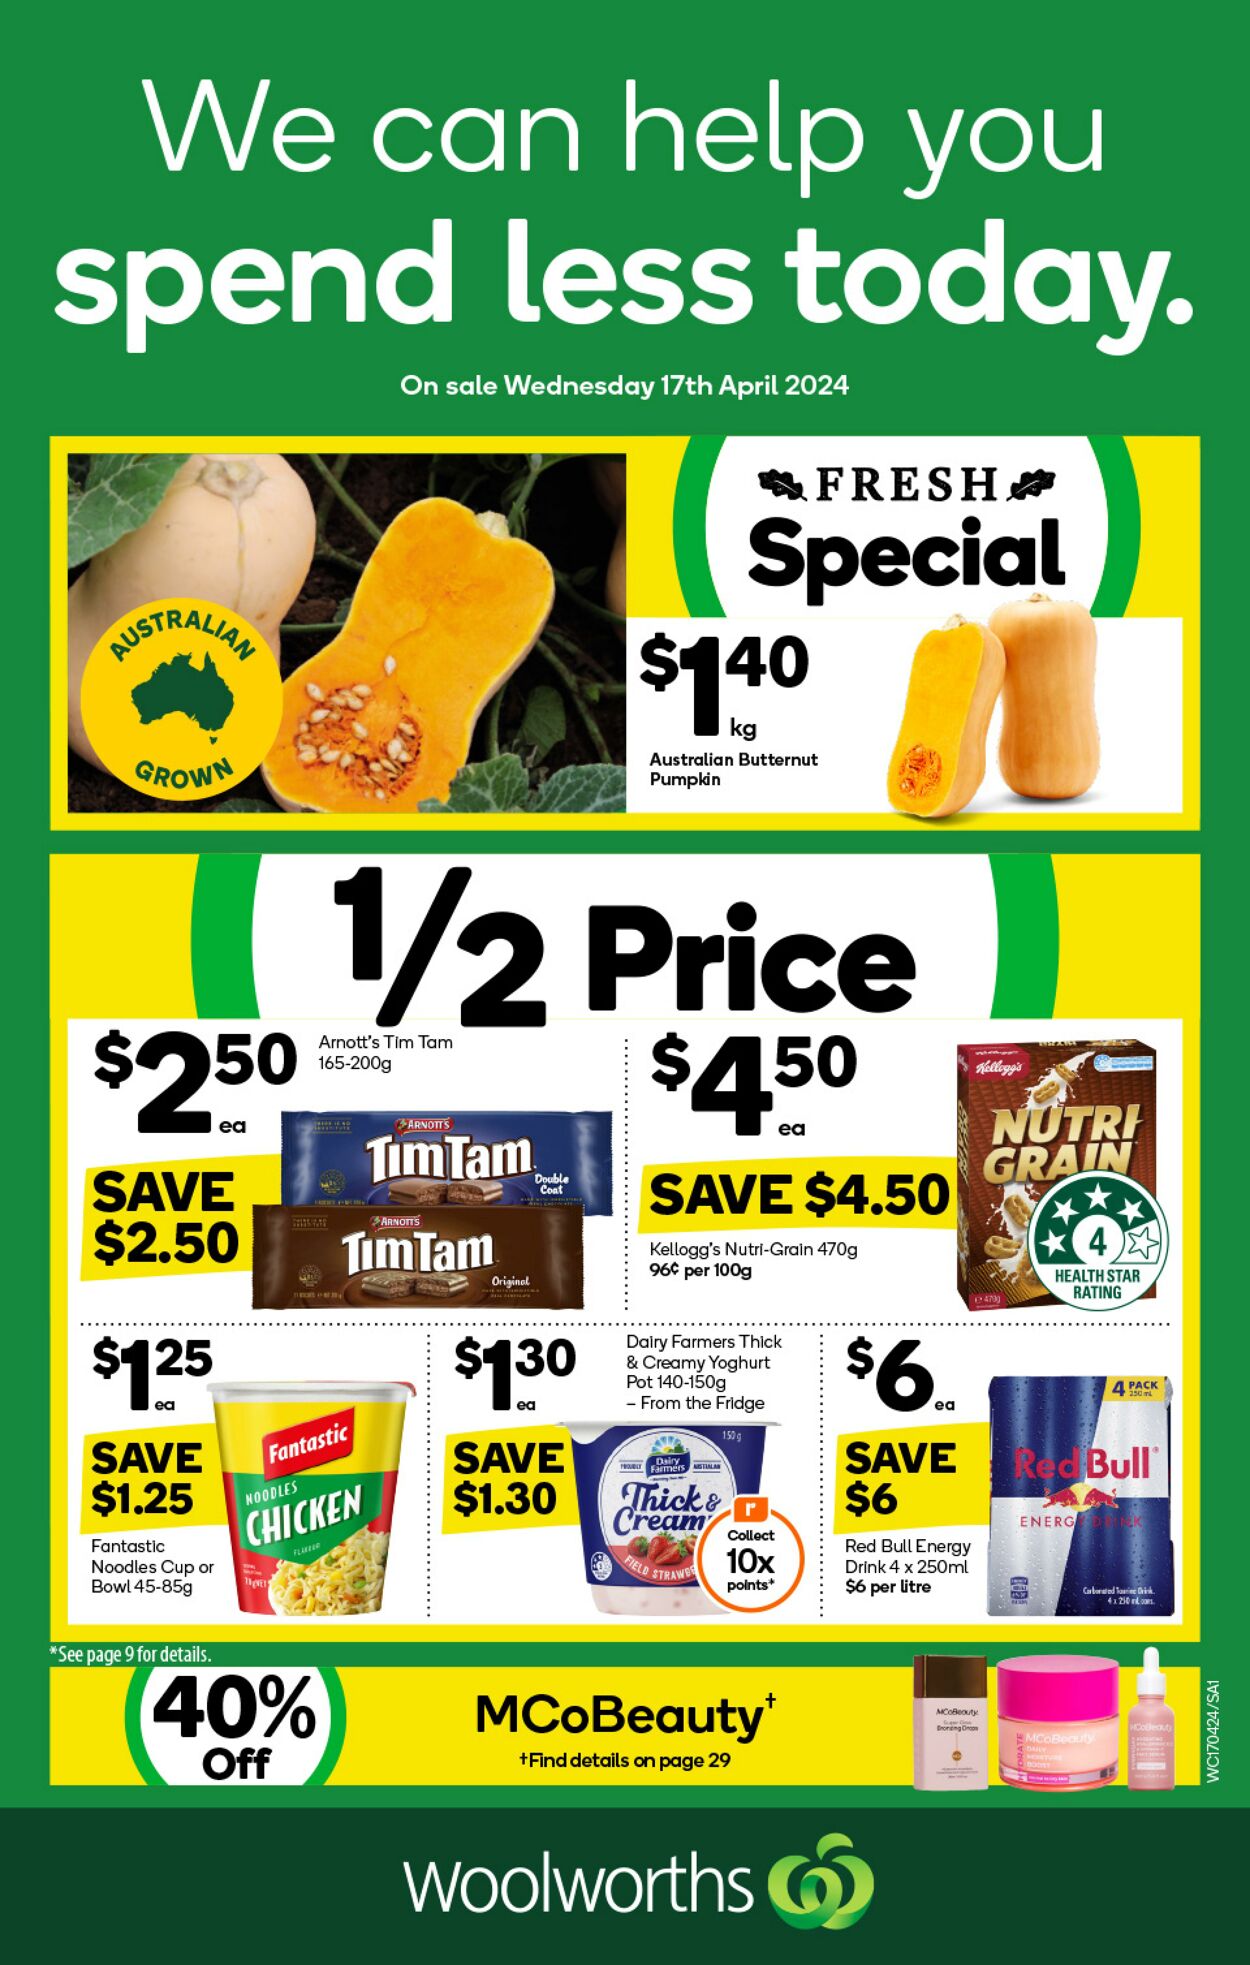 Catalogue Woolworths - Weekly Specials Catalogue SA 17 Apr, 2024 - 23 Apr, 2024